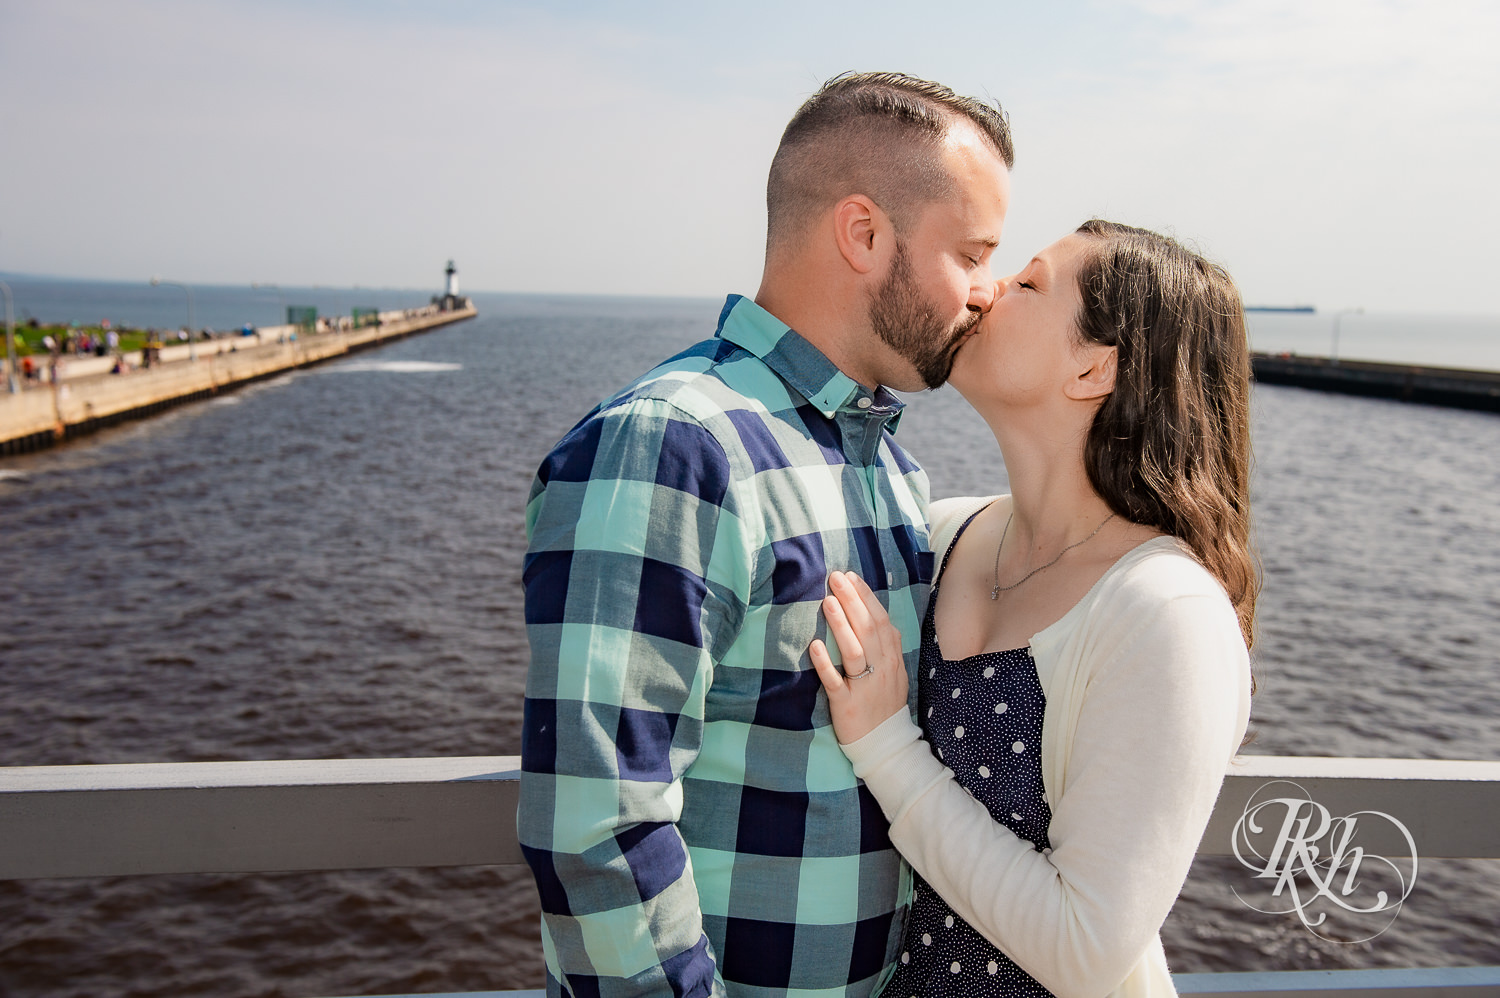 Man and woman kiss with Lake Superior in the background in Duluth, Minnesota.